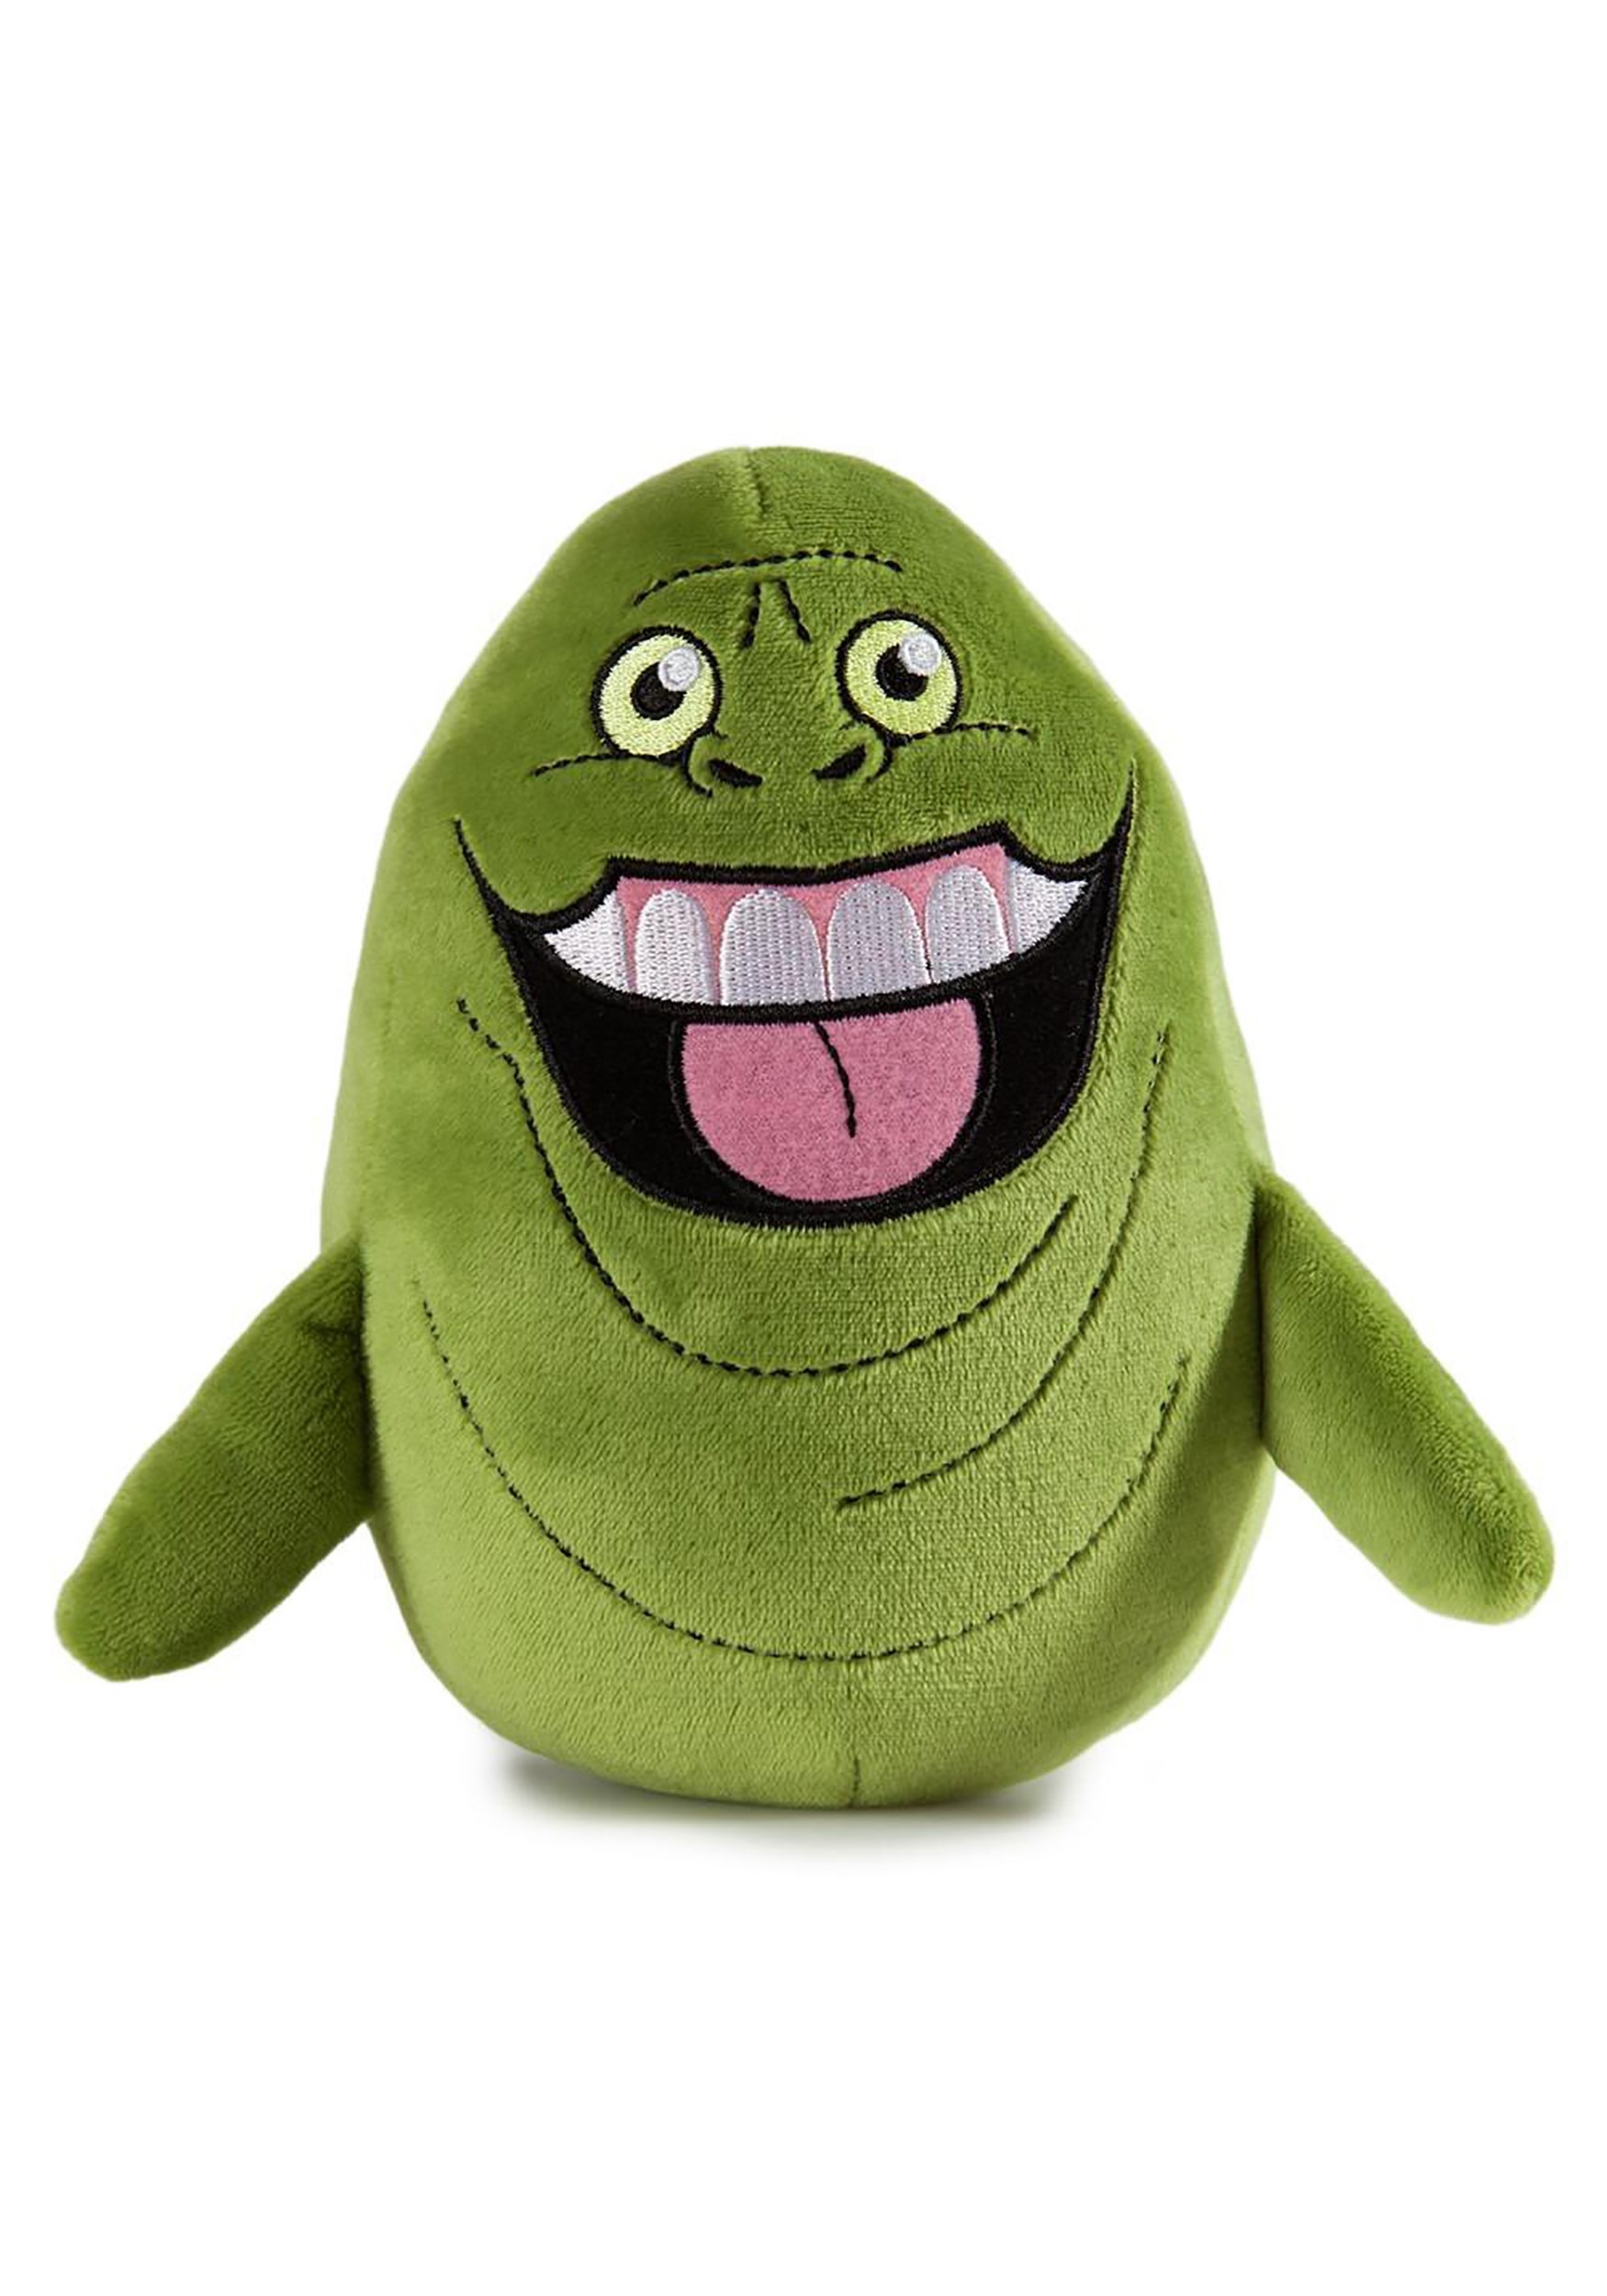 Ghostbusters Slimer Phunny Stuffed Toy